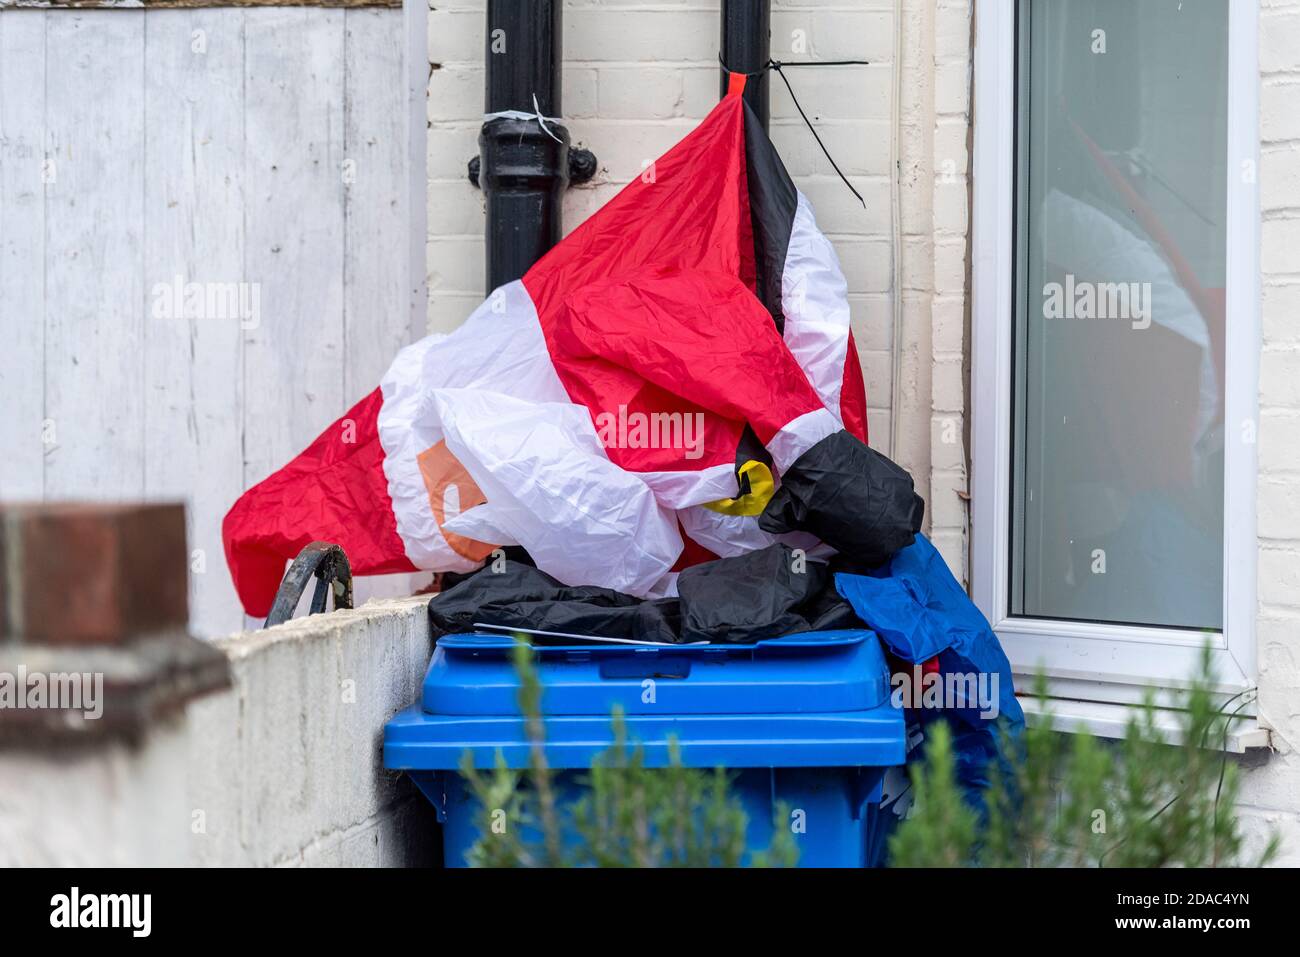 Deflated Father Christmas on a rubbish bin. Santa Claus outside decoration gone flat on waste bin. Christmas 2020 defined. Big let down Stock Photo